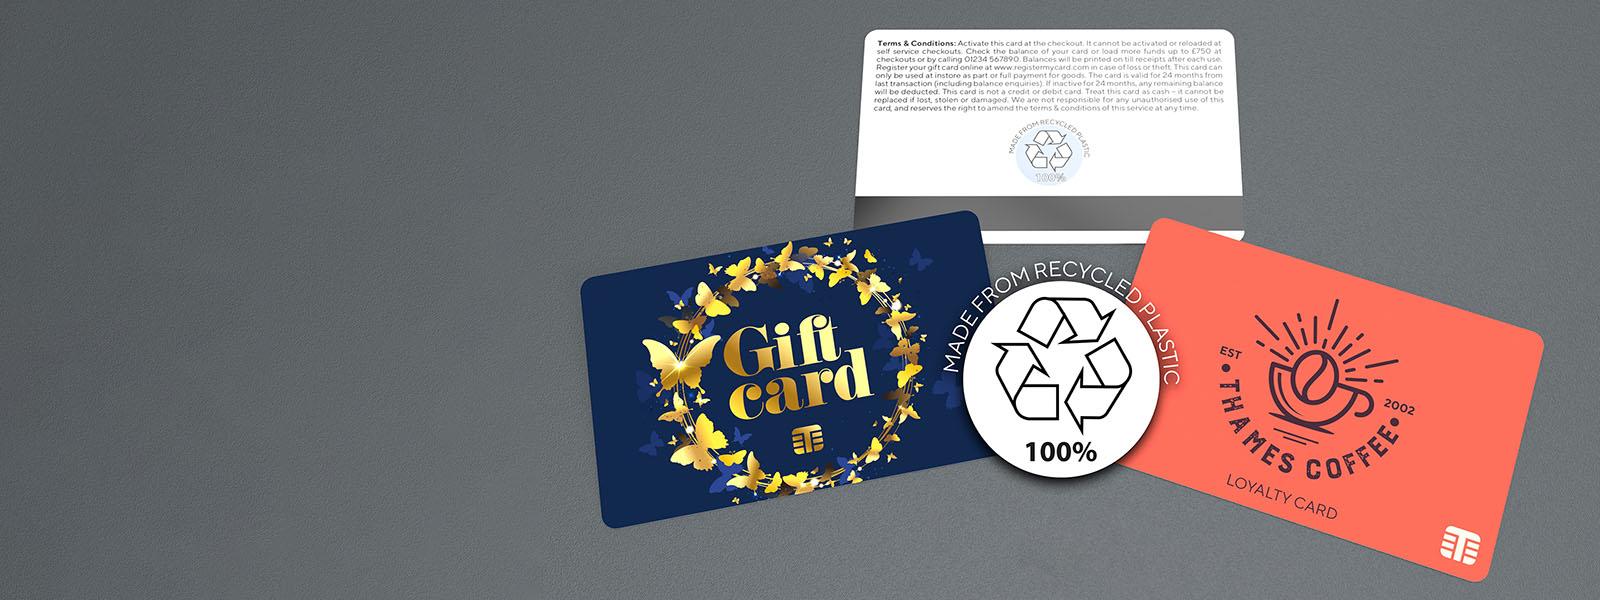 Thames Technology gift and loyalty cards made from 100% recycled PVC